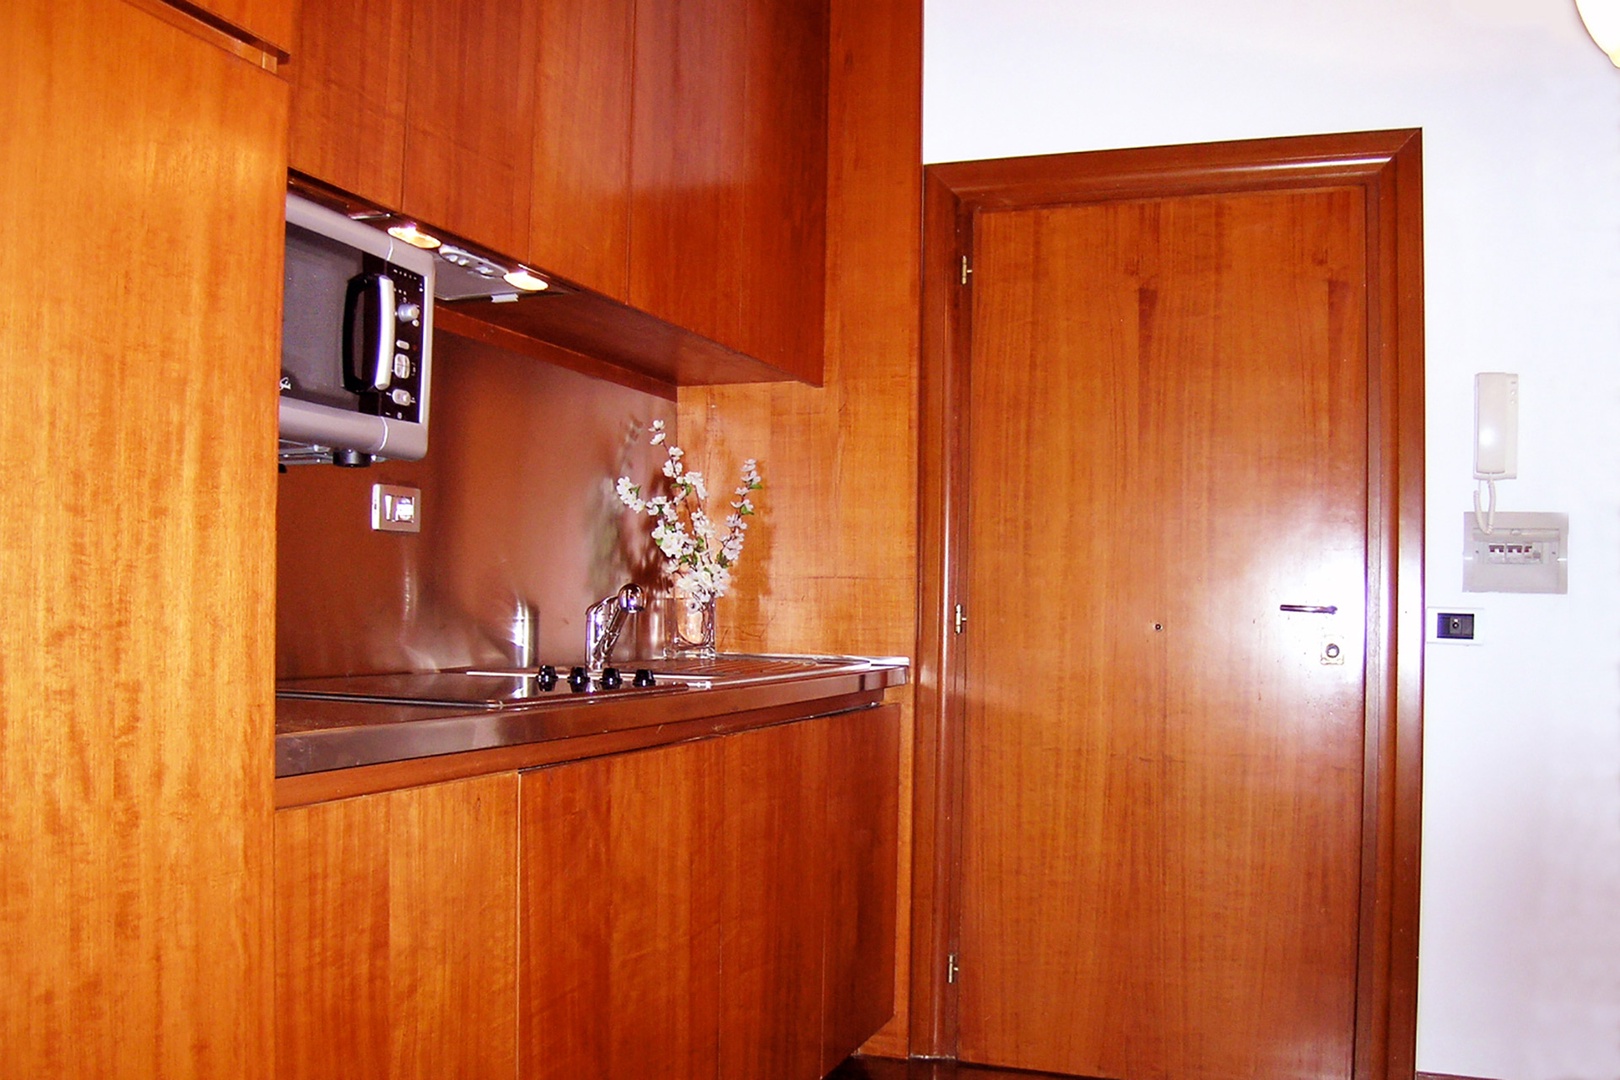 Enter the apartment front door and the kitchenette is immediately to your right.